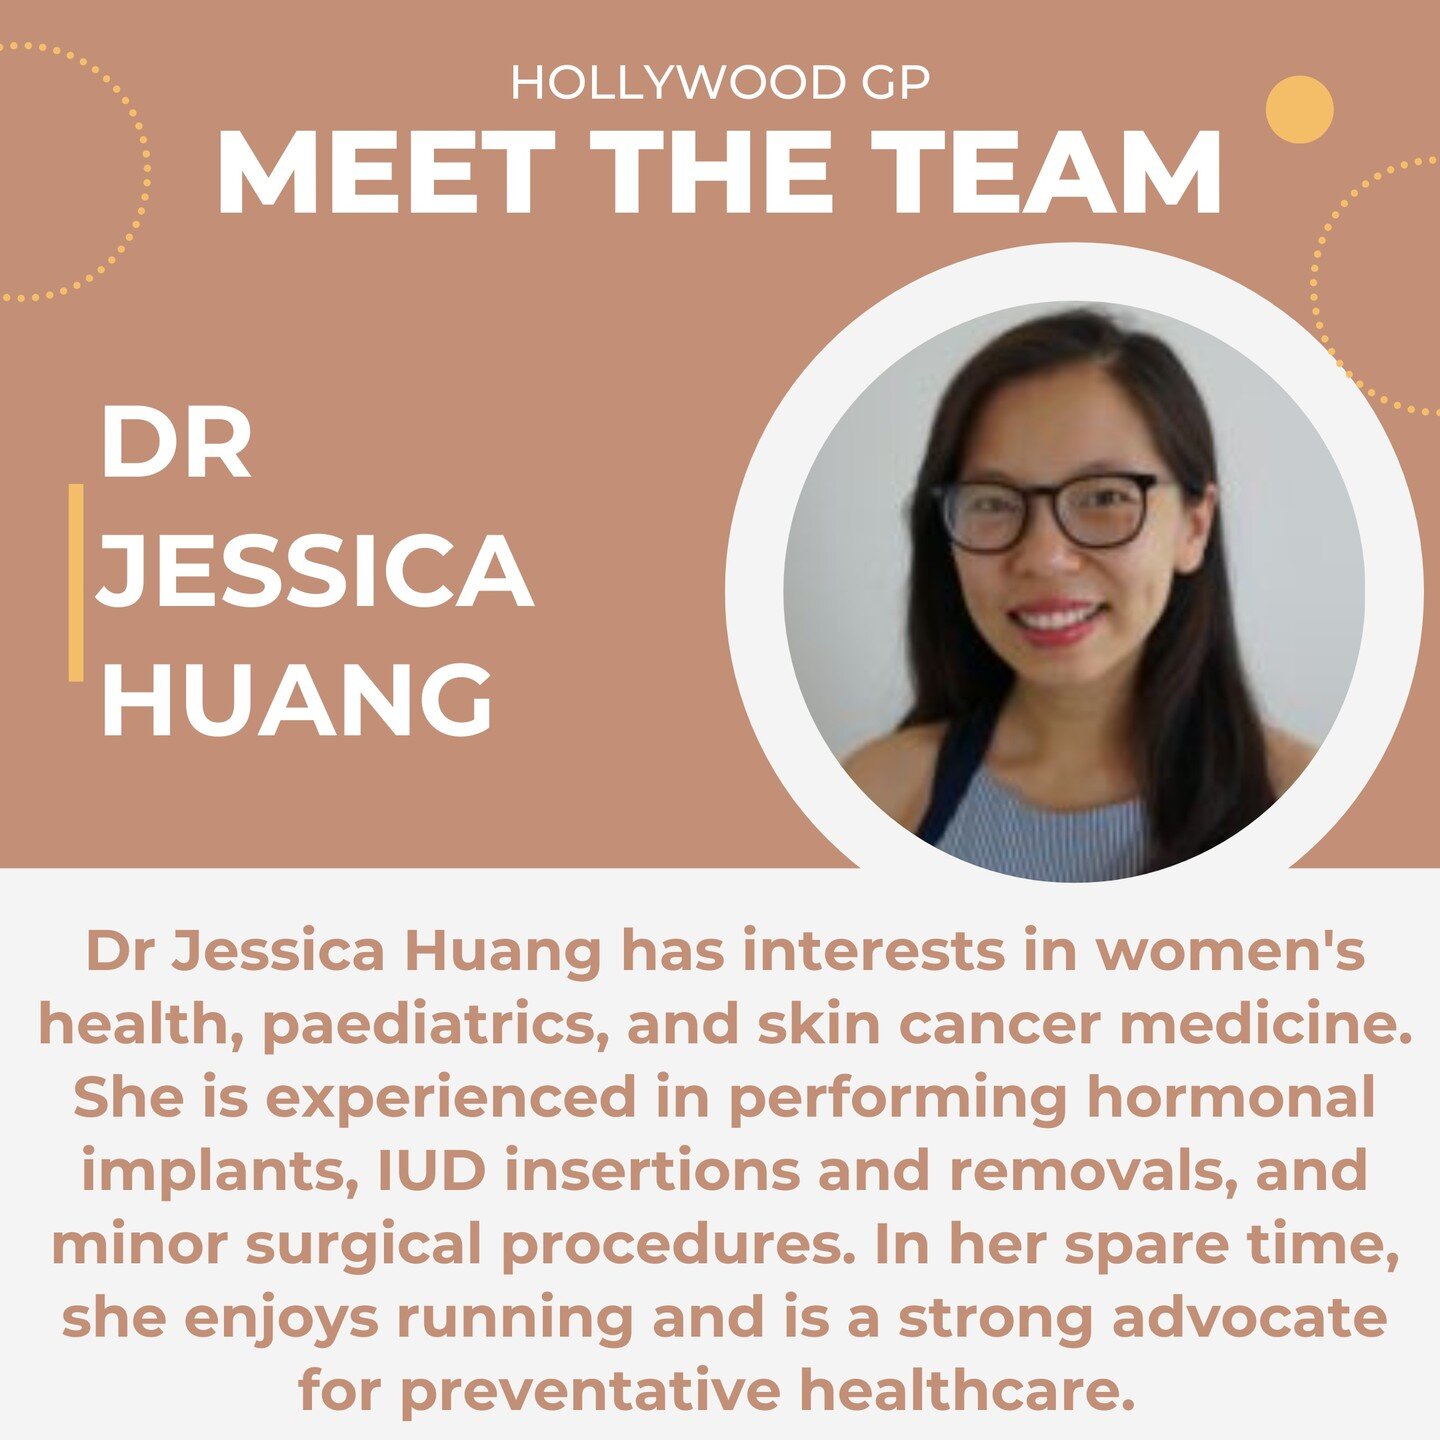 MEET THE TEAM! 

With a passion for skin cancer medicine, paediatrics, and women's health, Dr Jessica Huang is dedicated to providing patient-centered holistic care that prioritises your well-being. Jess is a strong advocate for preventative healthca